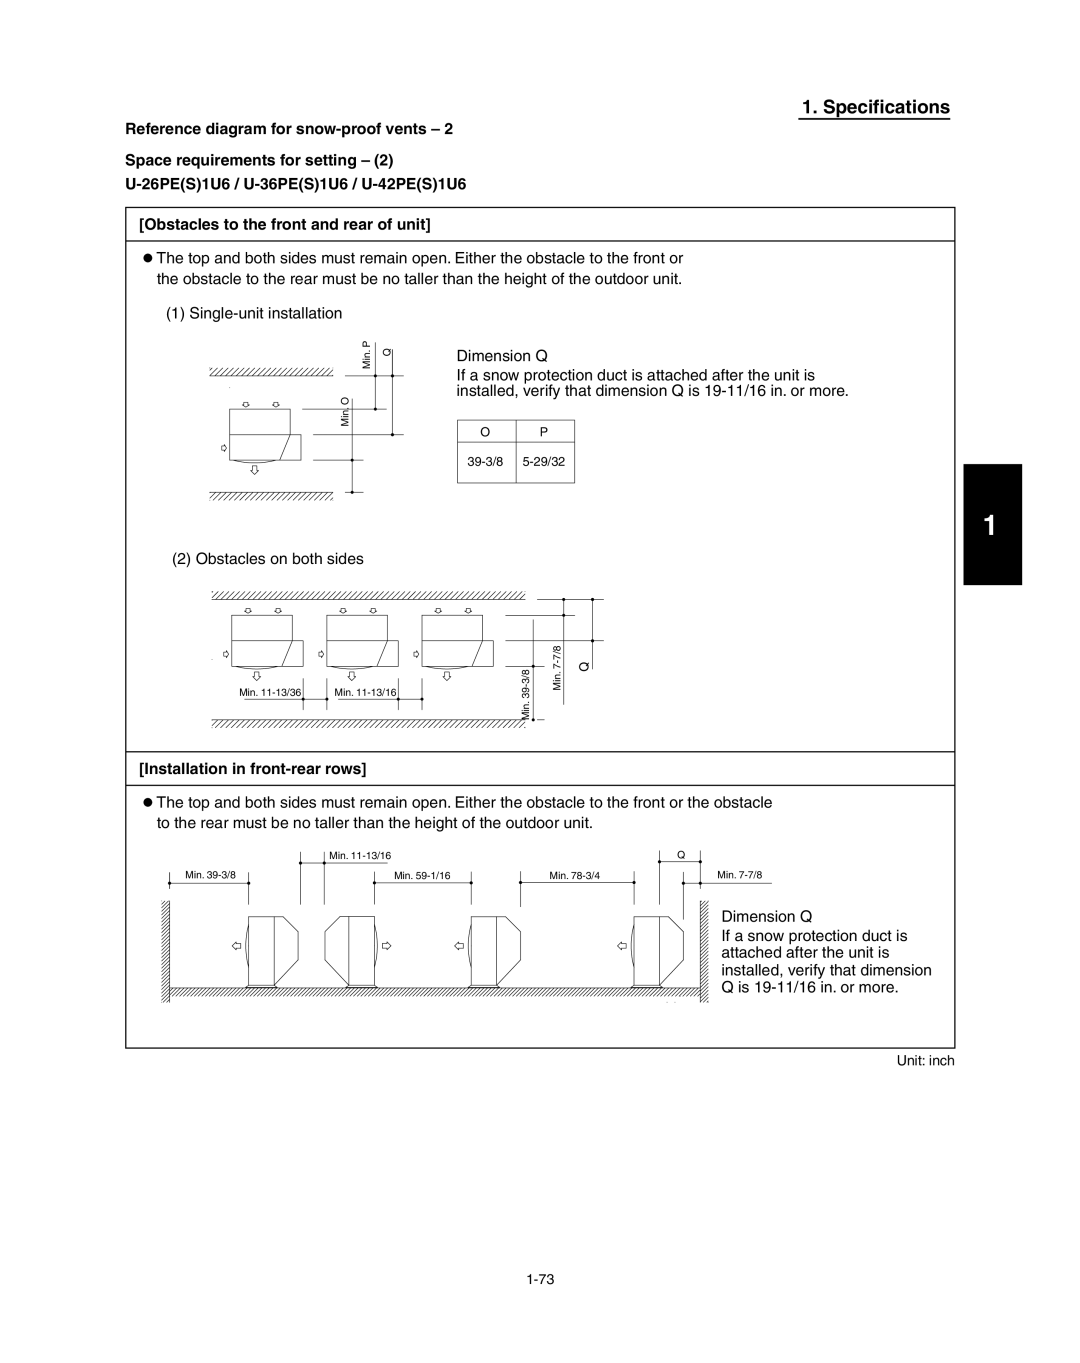 Panasonic R410A service manual Specifications, Reference diagram for snow-proofvents, Space requirements for setting 